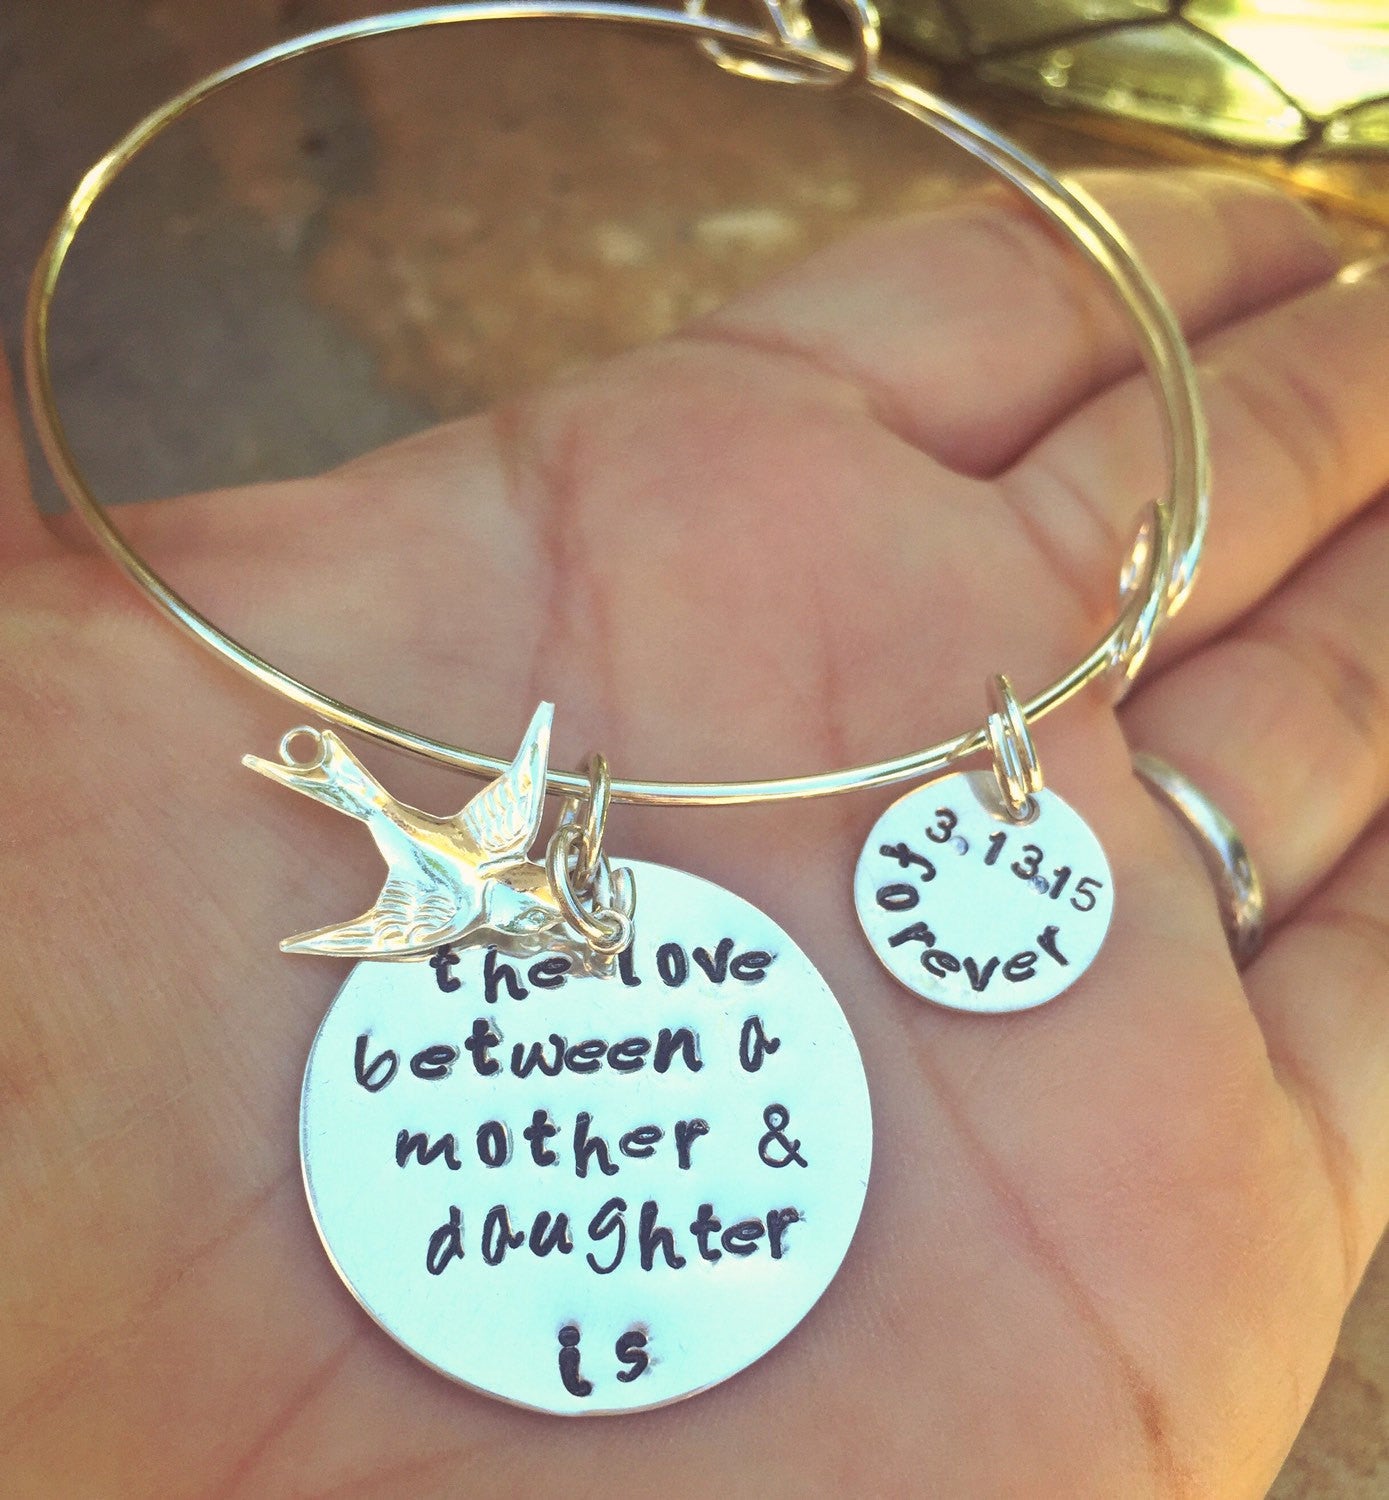 The Love Between A Mother And Daughter Is Forever Bangle - Natashaaloha, jewelry, bracelets, necklace, keychains, fishing lures, gifts for men, charms, personalized, 